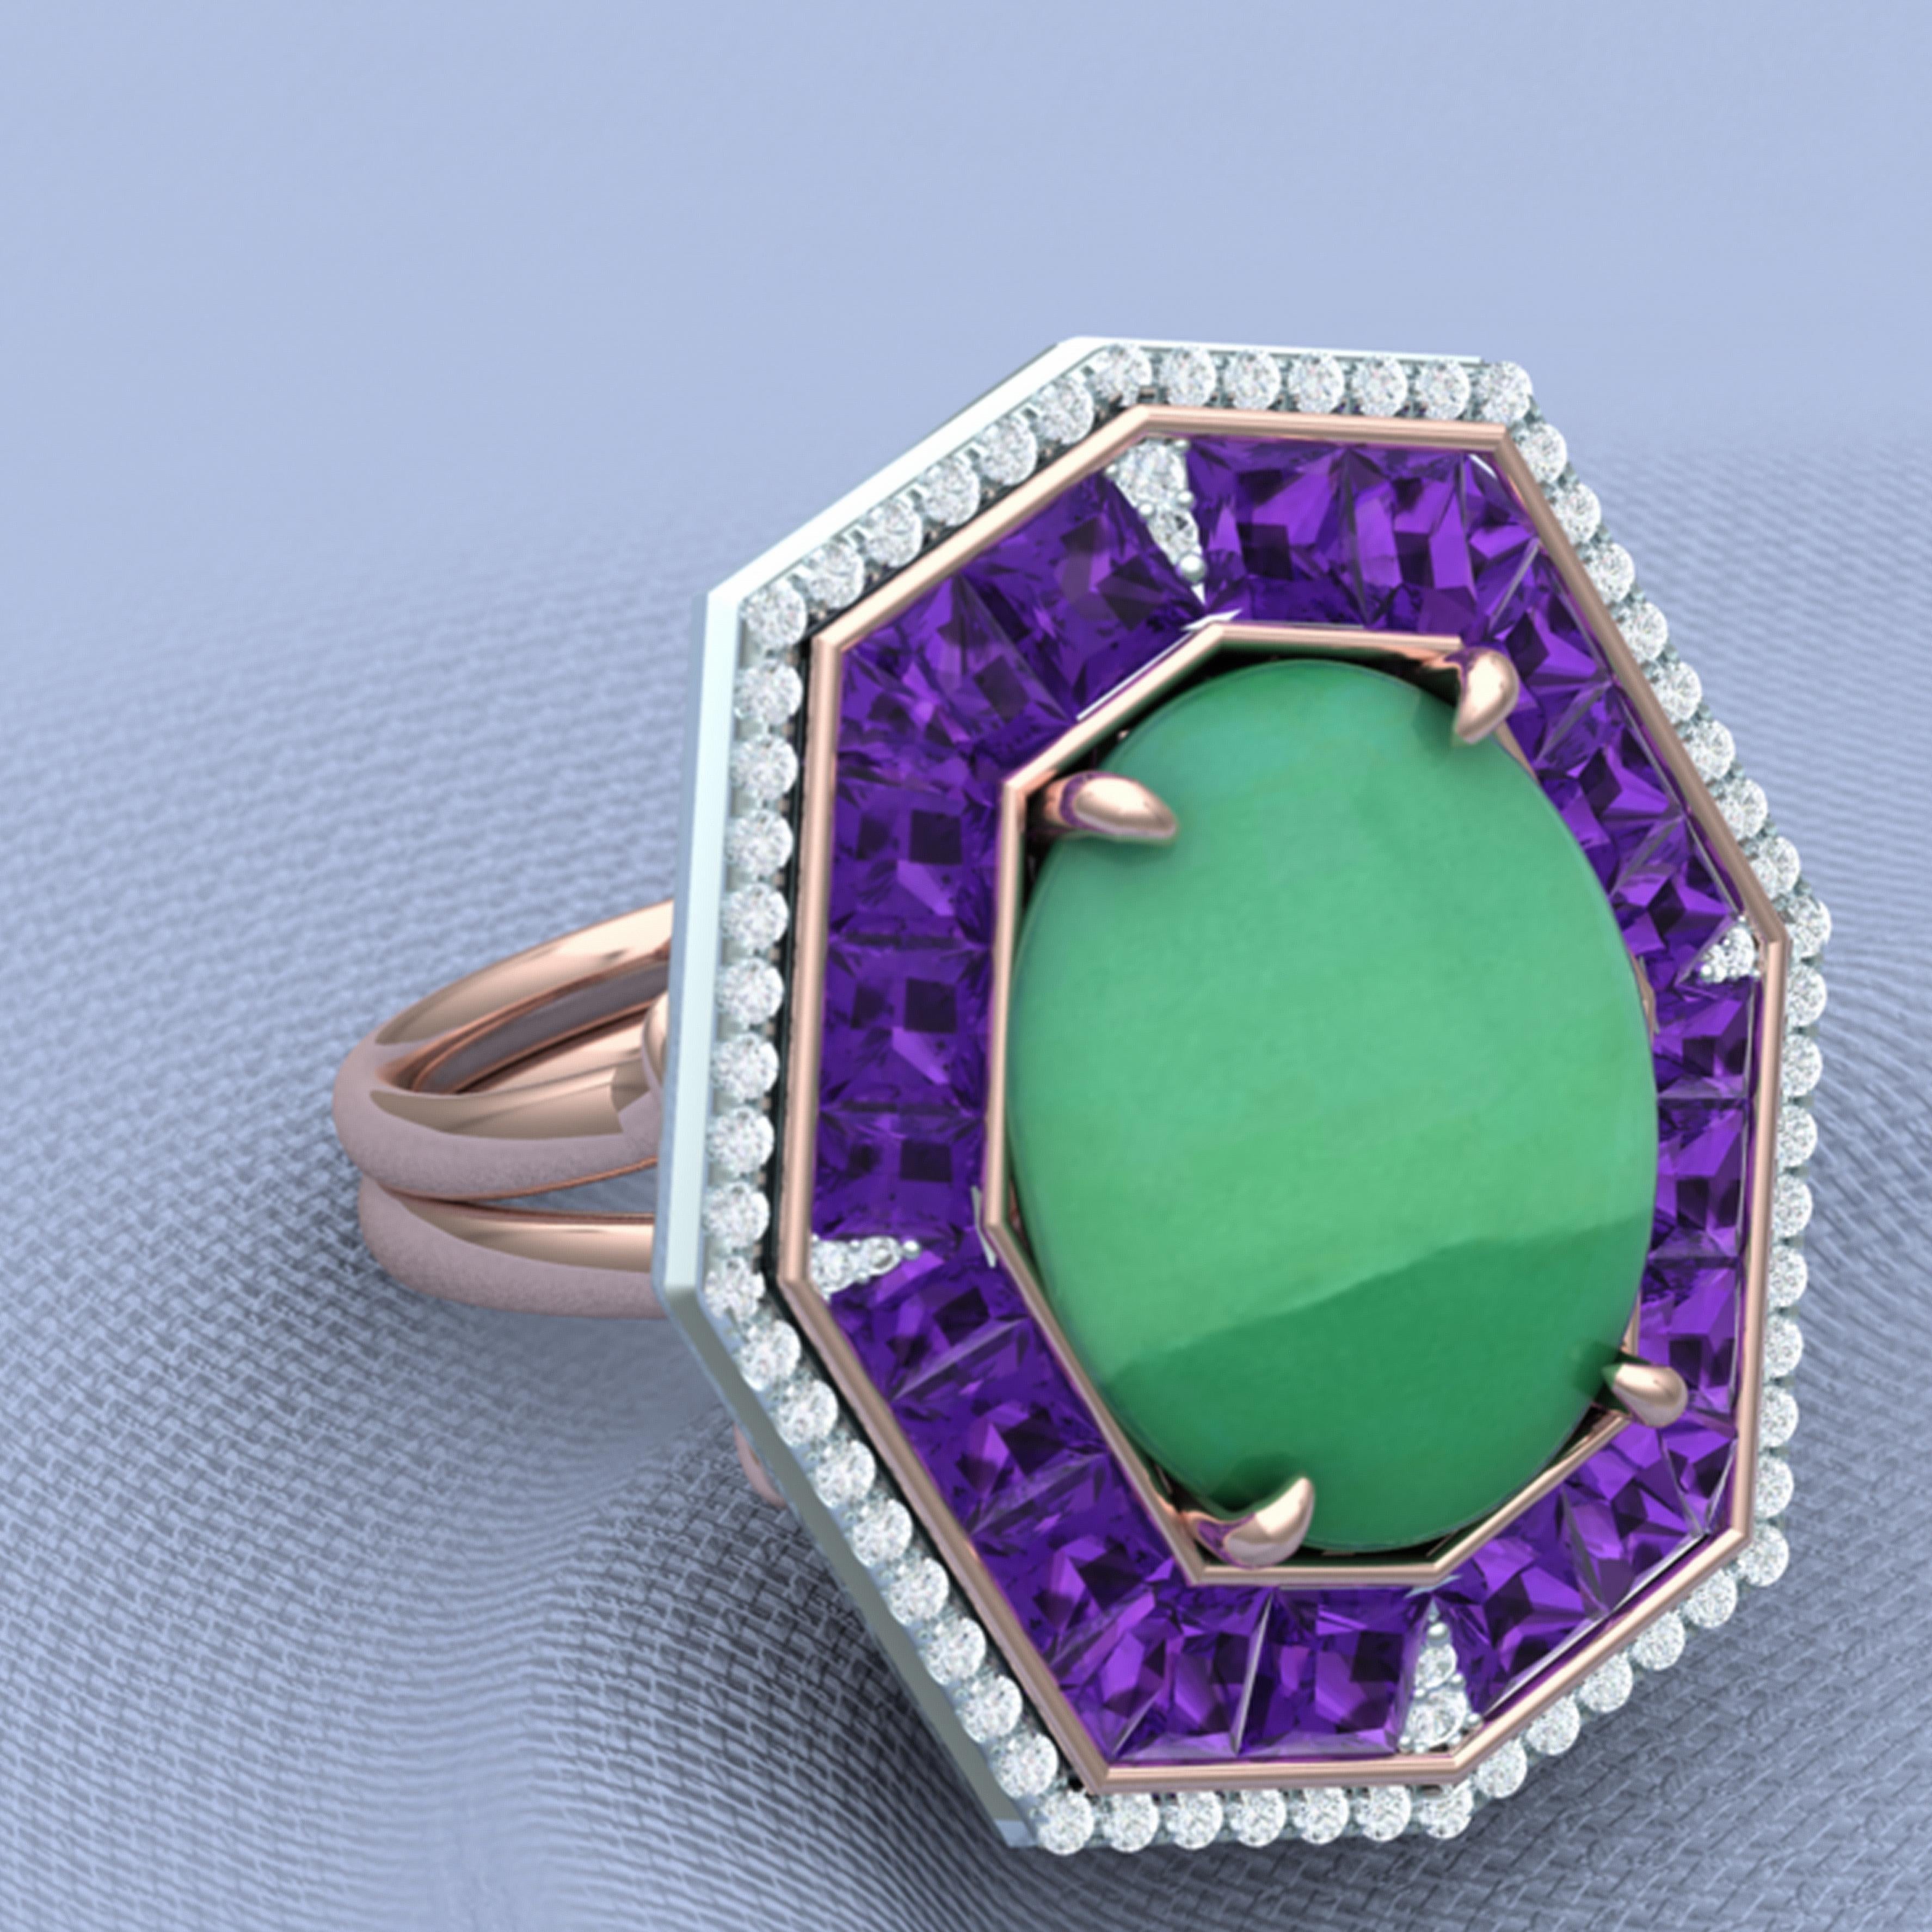 7 Carat GIA Certified Jadeite Purple Sapphire and Diamond Ring In Excellent Condition For Sale In Aliso Viejo, CA